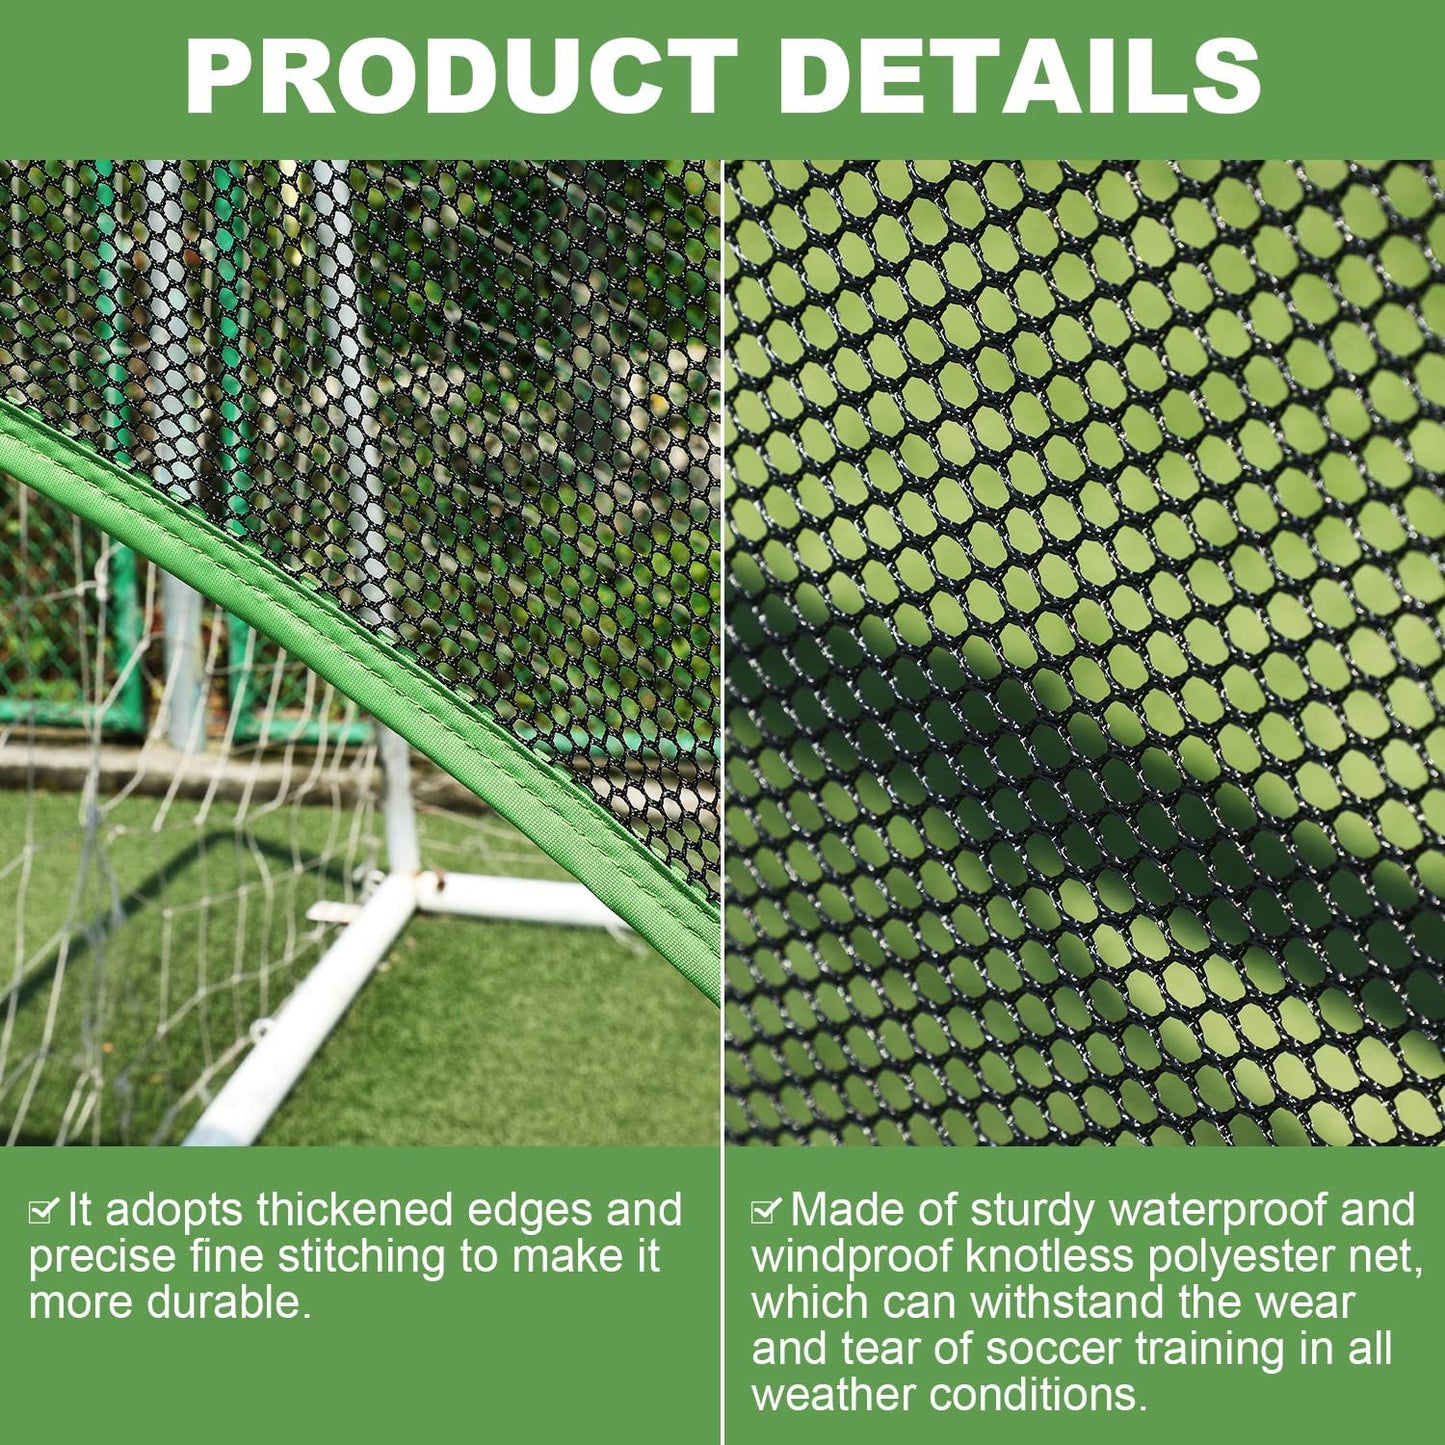 Wosofe Soccer Goal Target Soccer Training Equipment Net with Scoring Zones Improve Kick Practice Shooting and Goalshot Accuracy Training